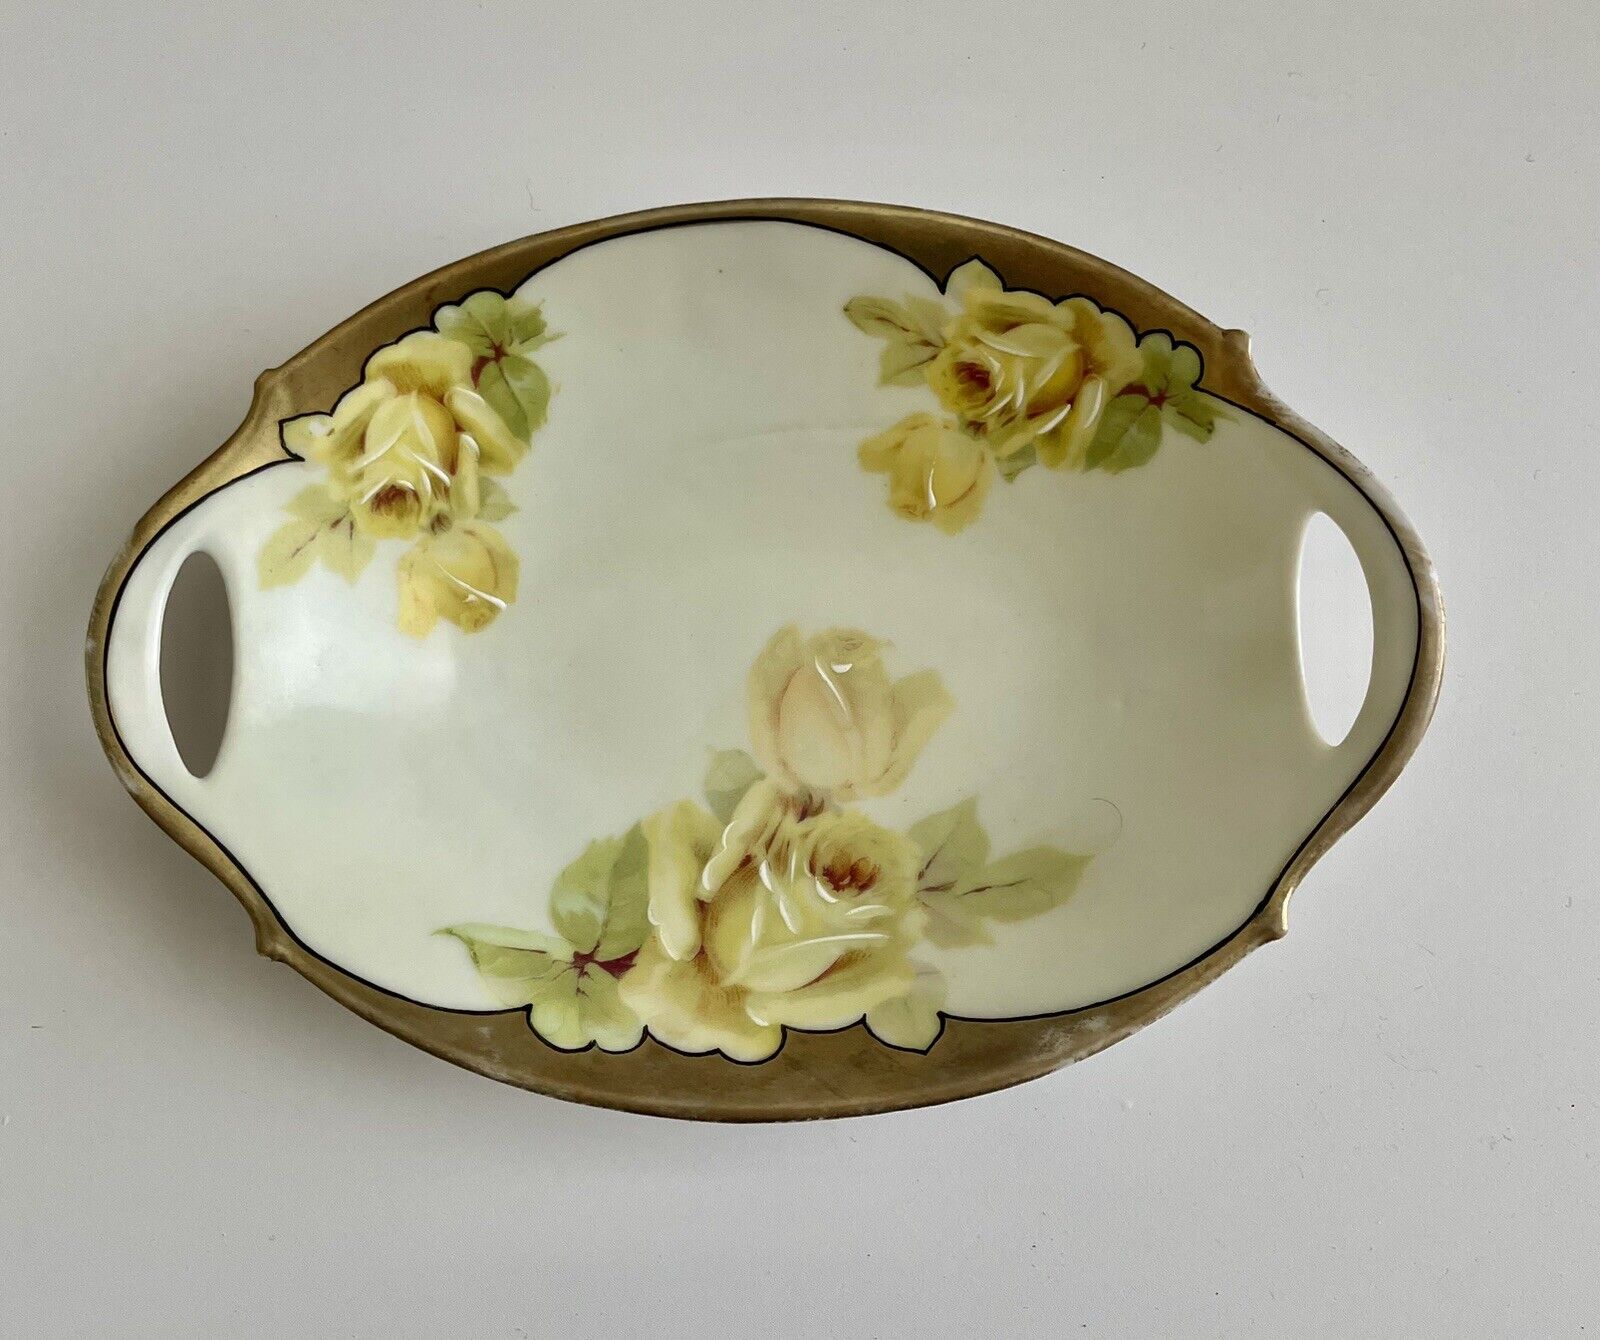 Antique Bavarian Trinket Dish With Yellow Roses And Gold Trim